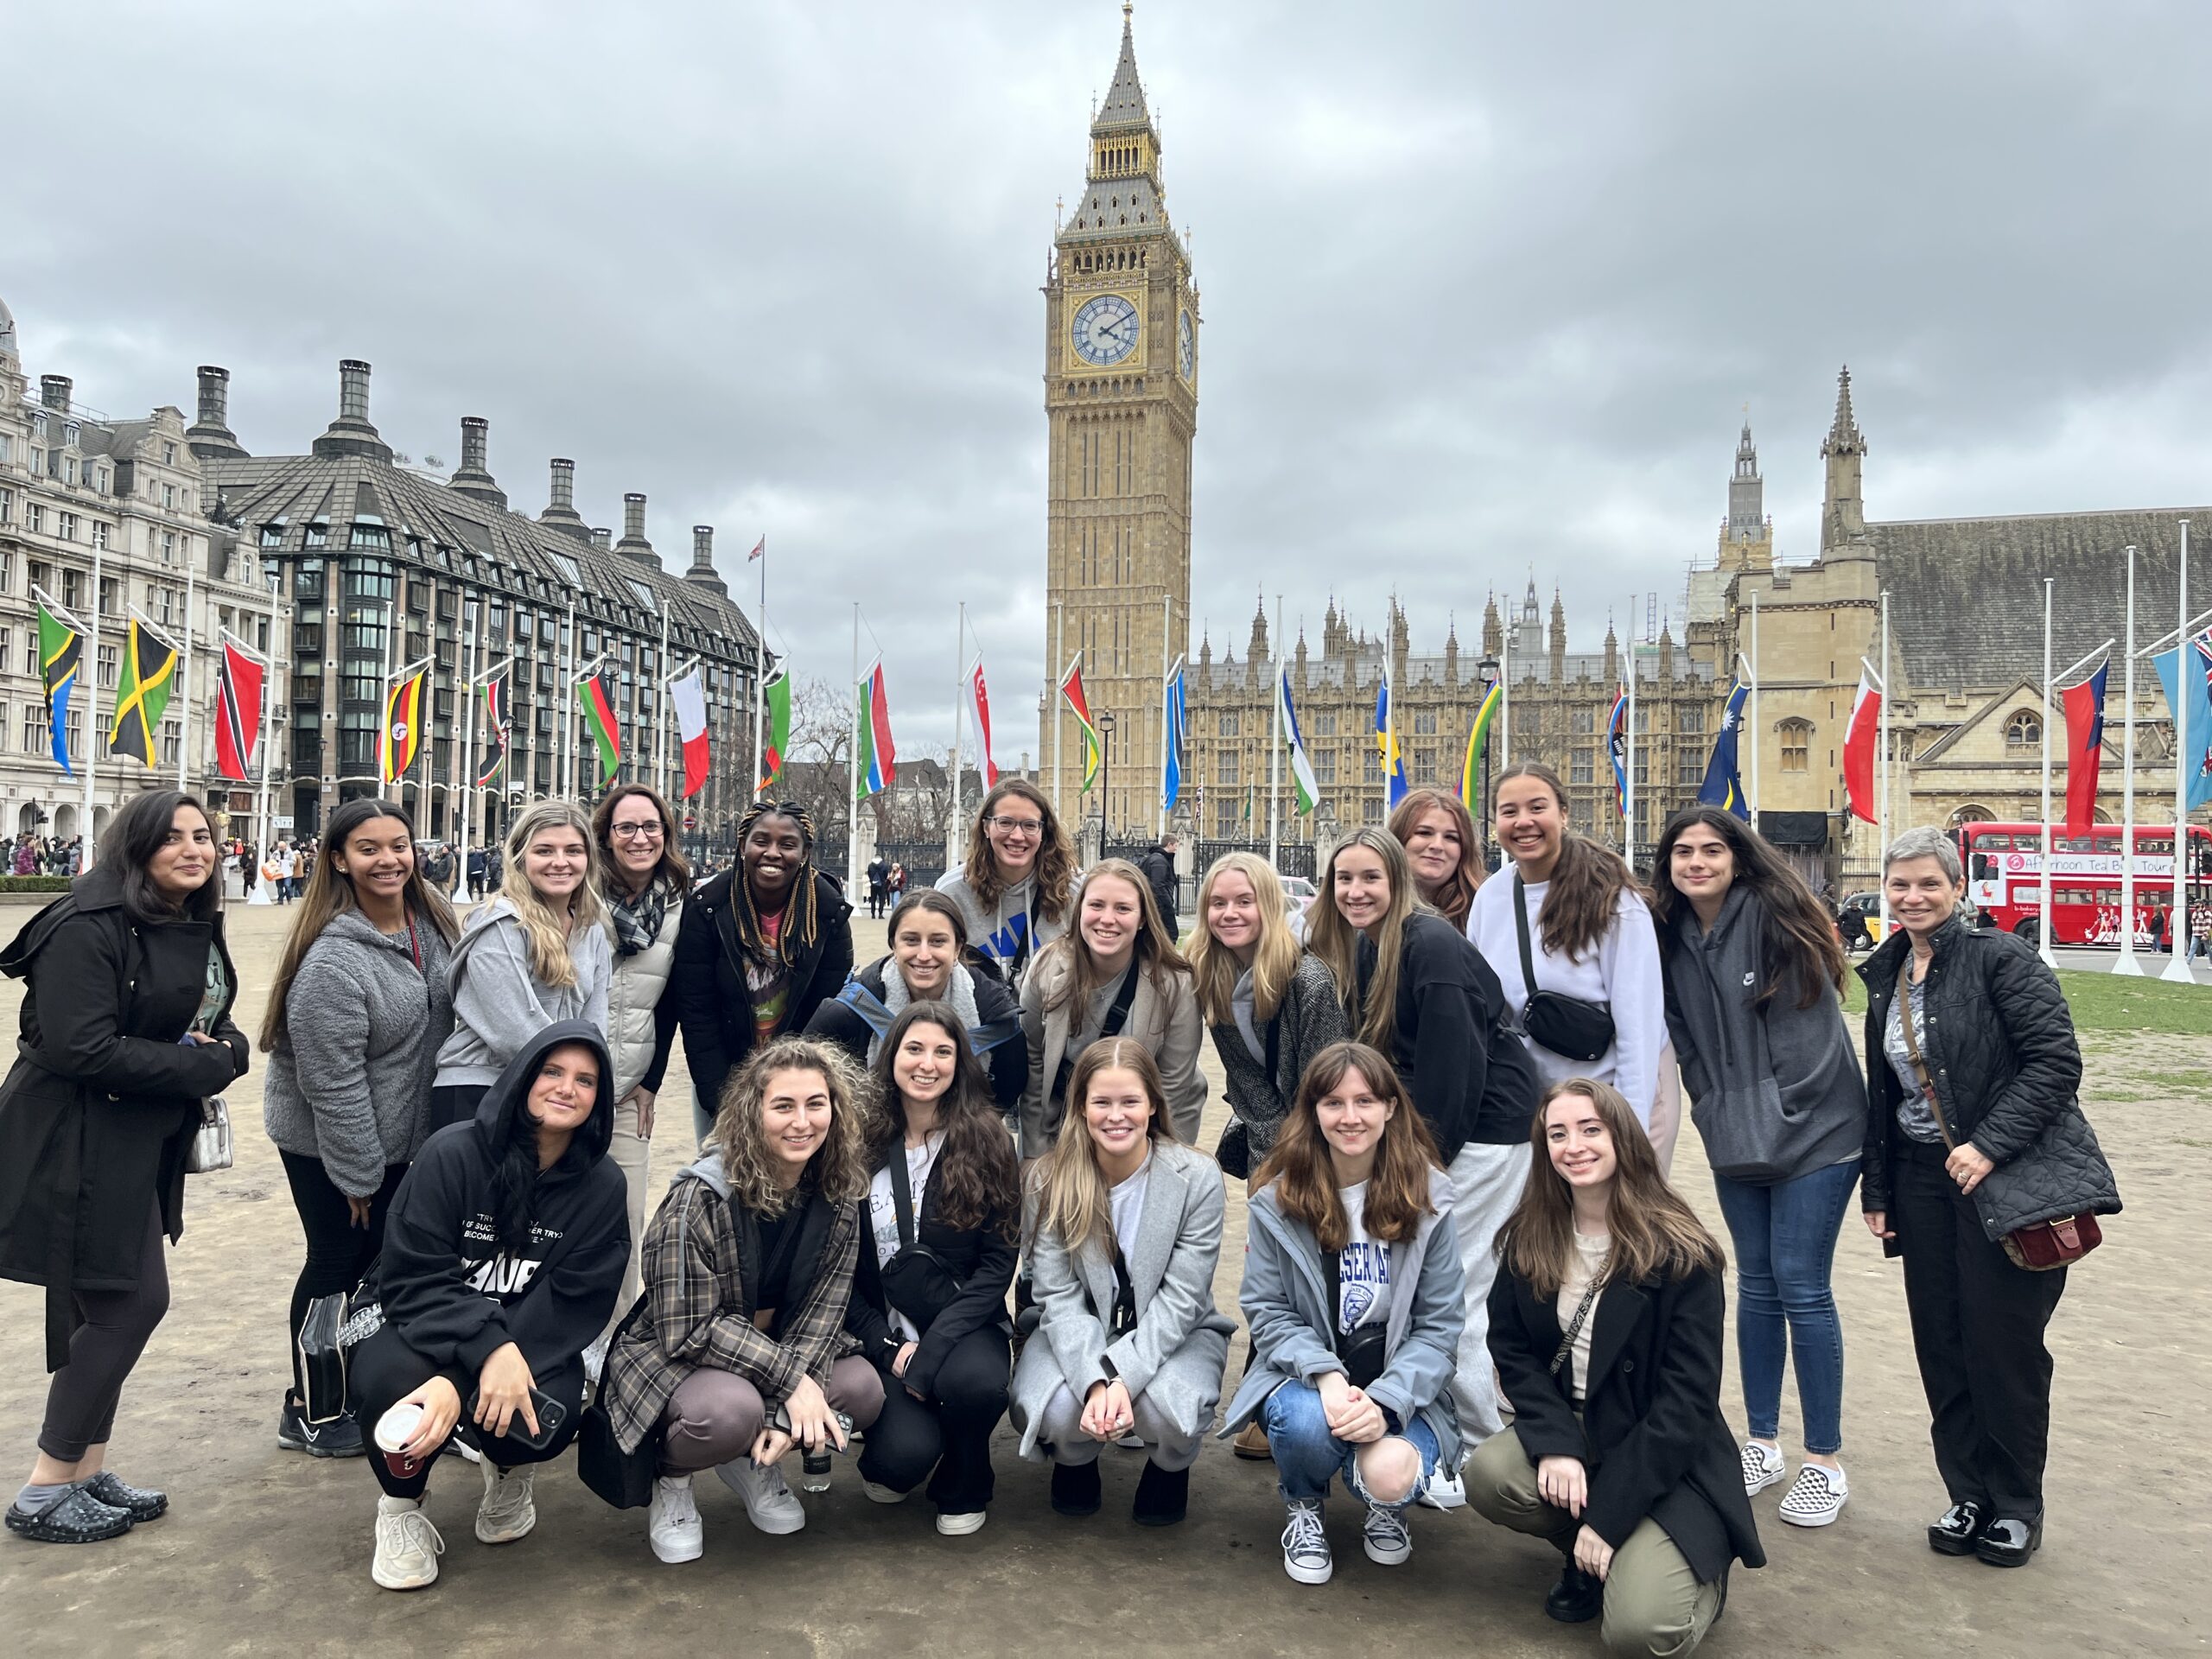 Students gathered in front of Big Ben in London, England